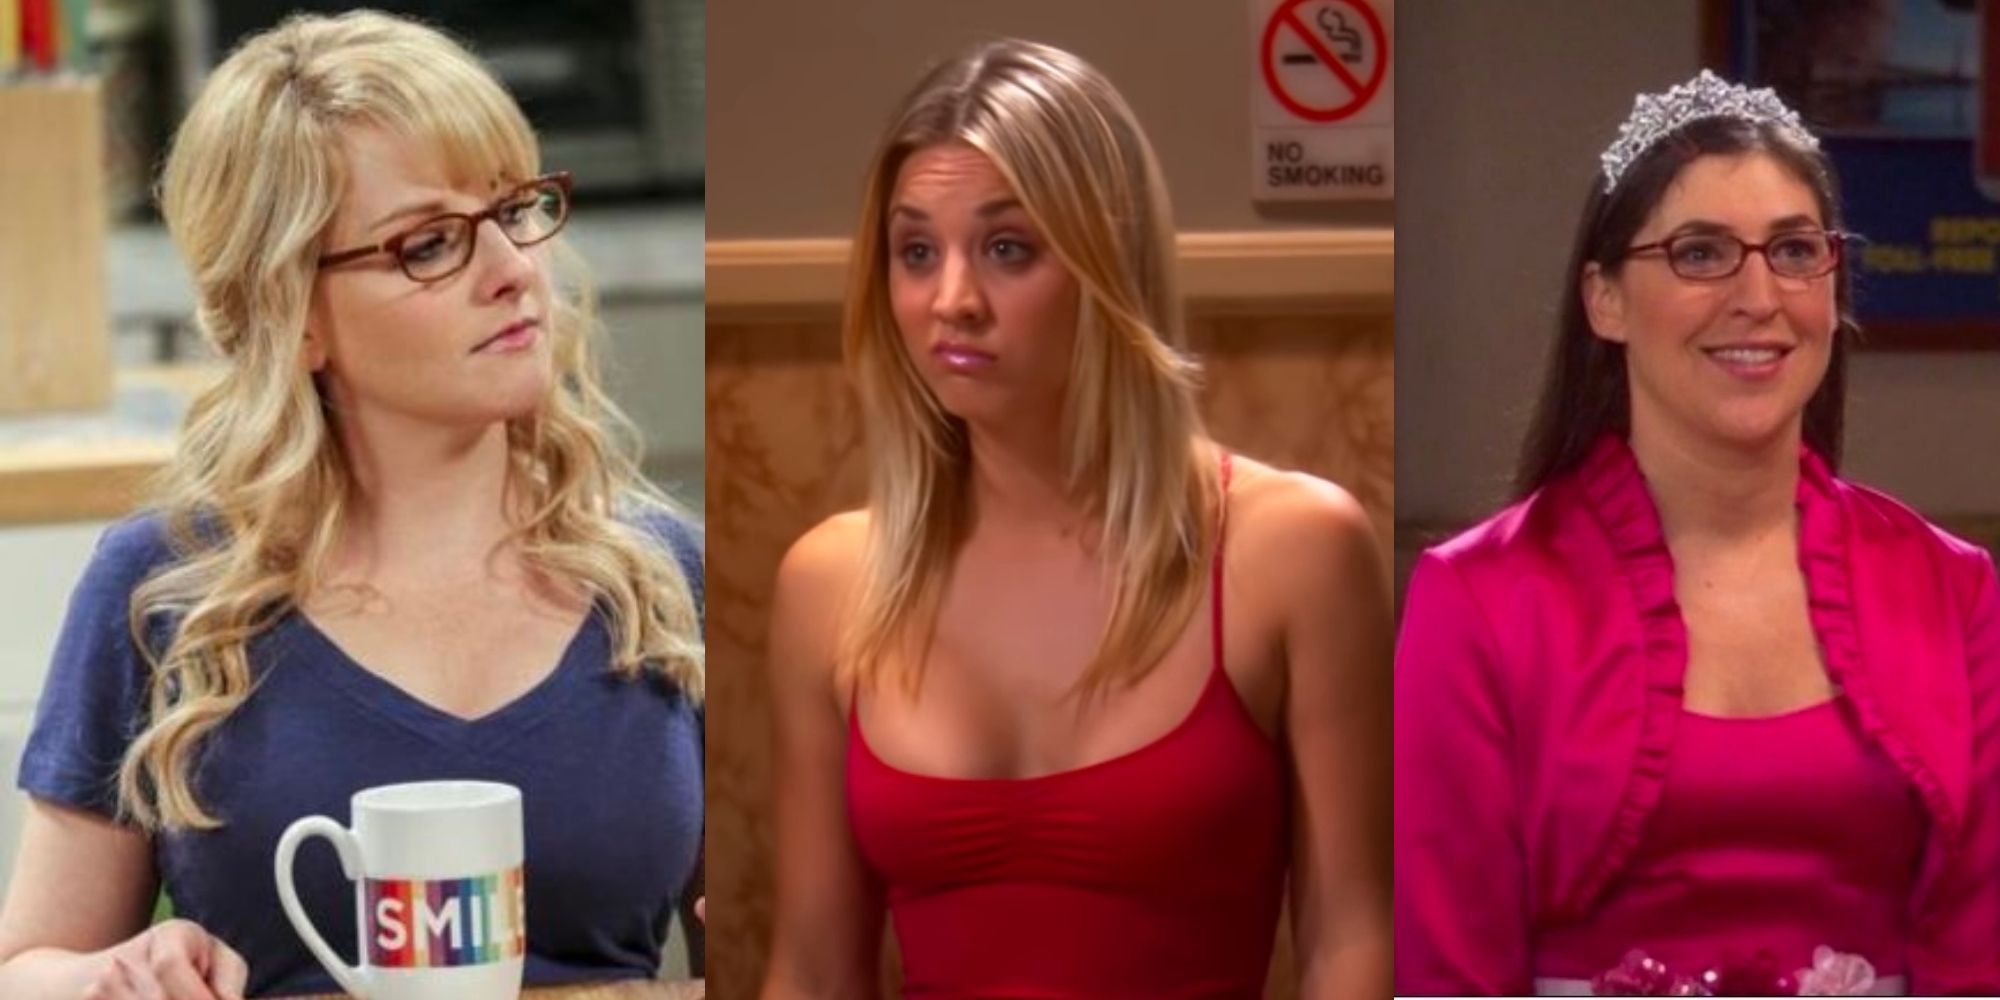 Kaley Cuoco Melissa Raunch and Mayim Bialik as Penny Bernadette and Amy in the Big Bang Theory